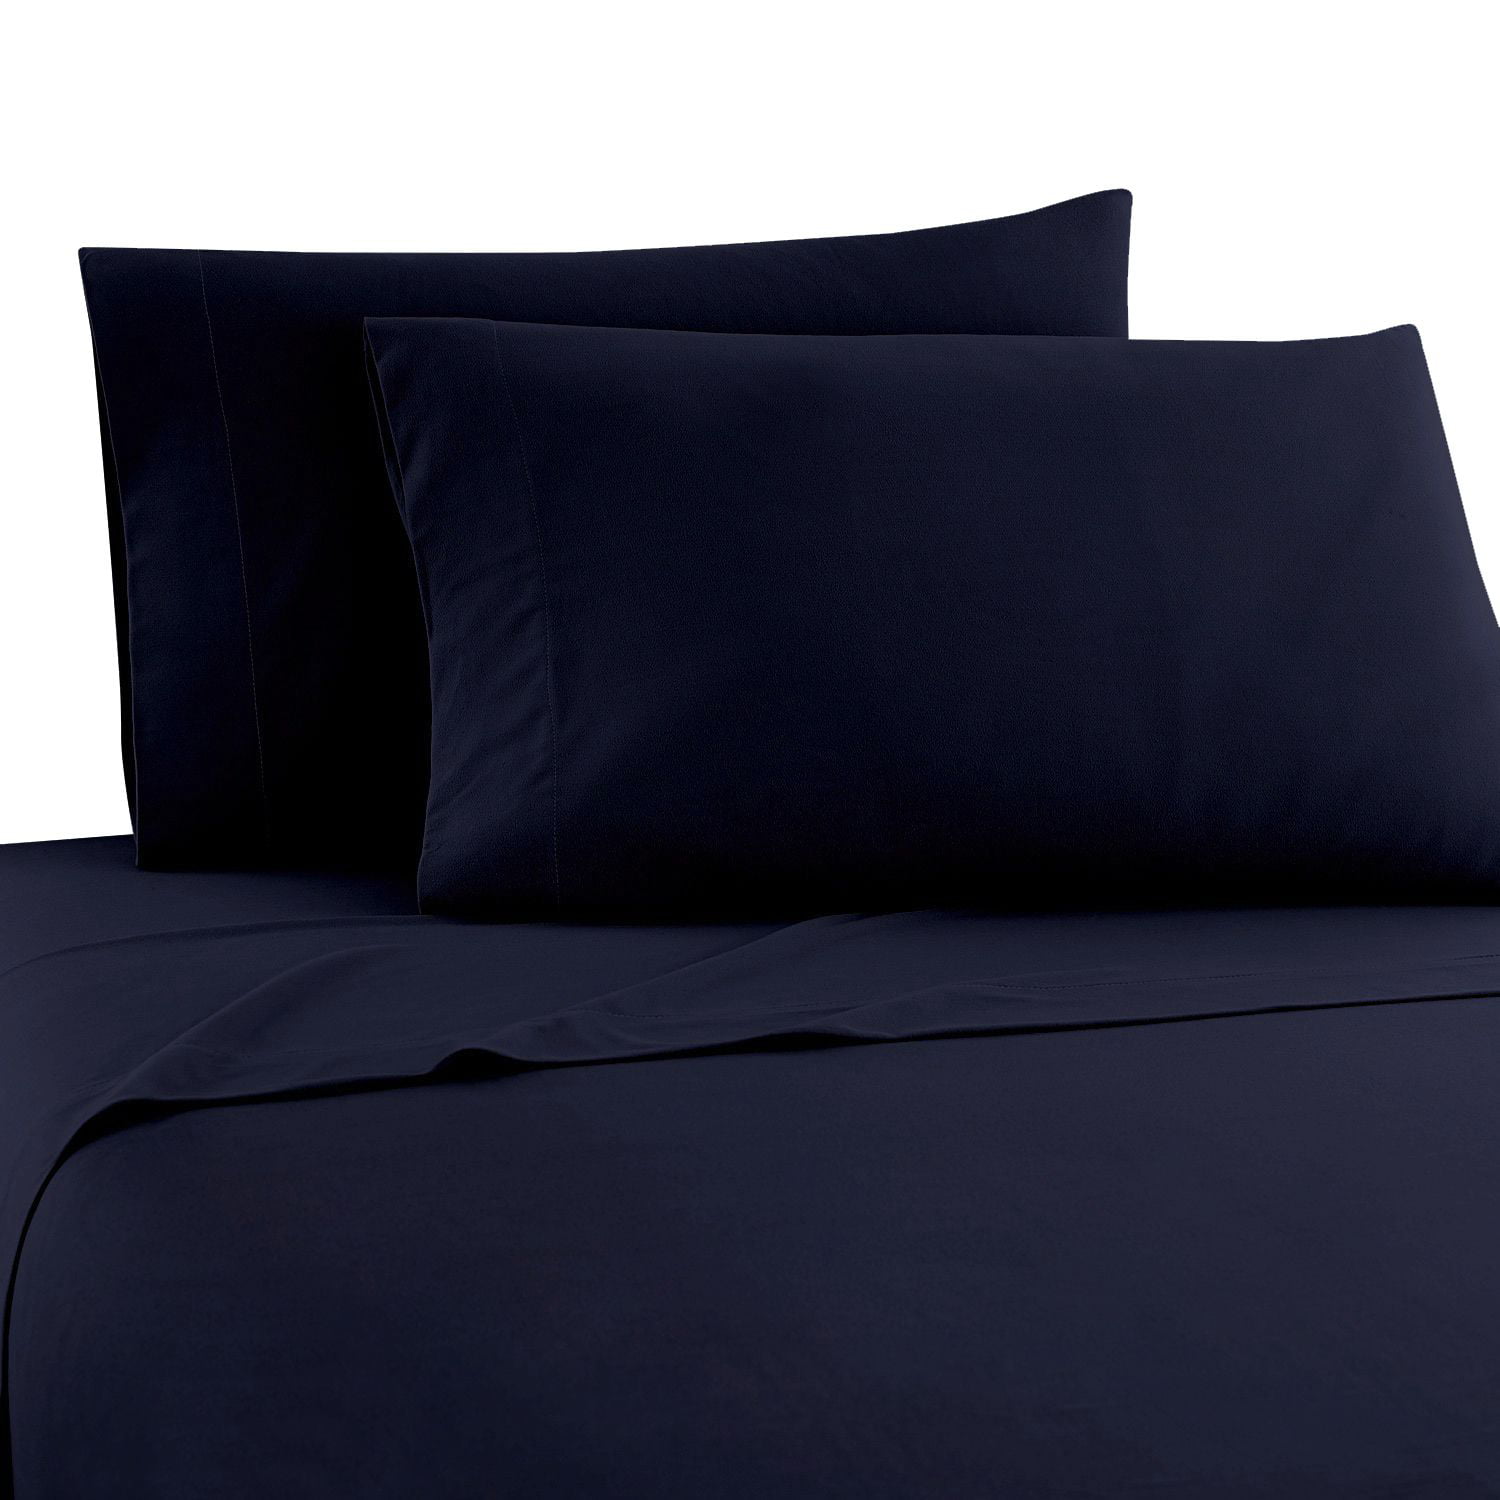 Details about   Siky &Soft 4 PC Attached Water Bed Sheet Set 15" Super Single Size Solid Pattern 